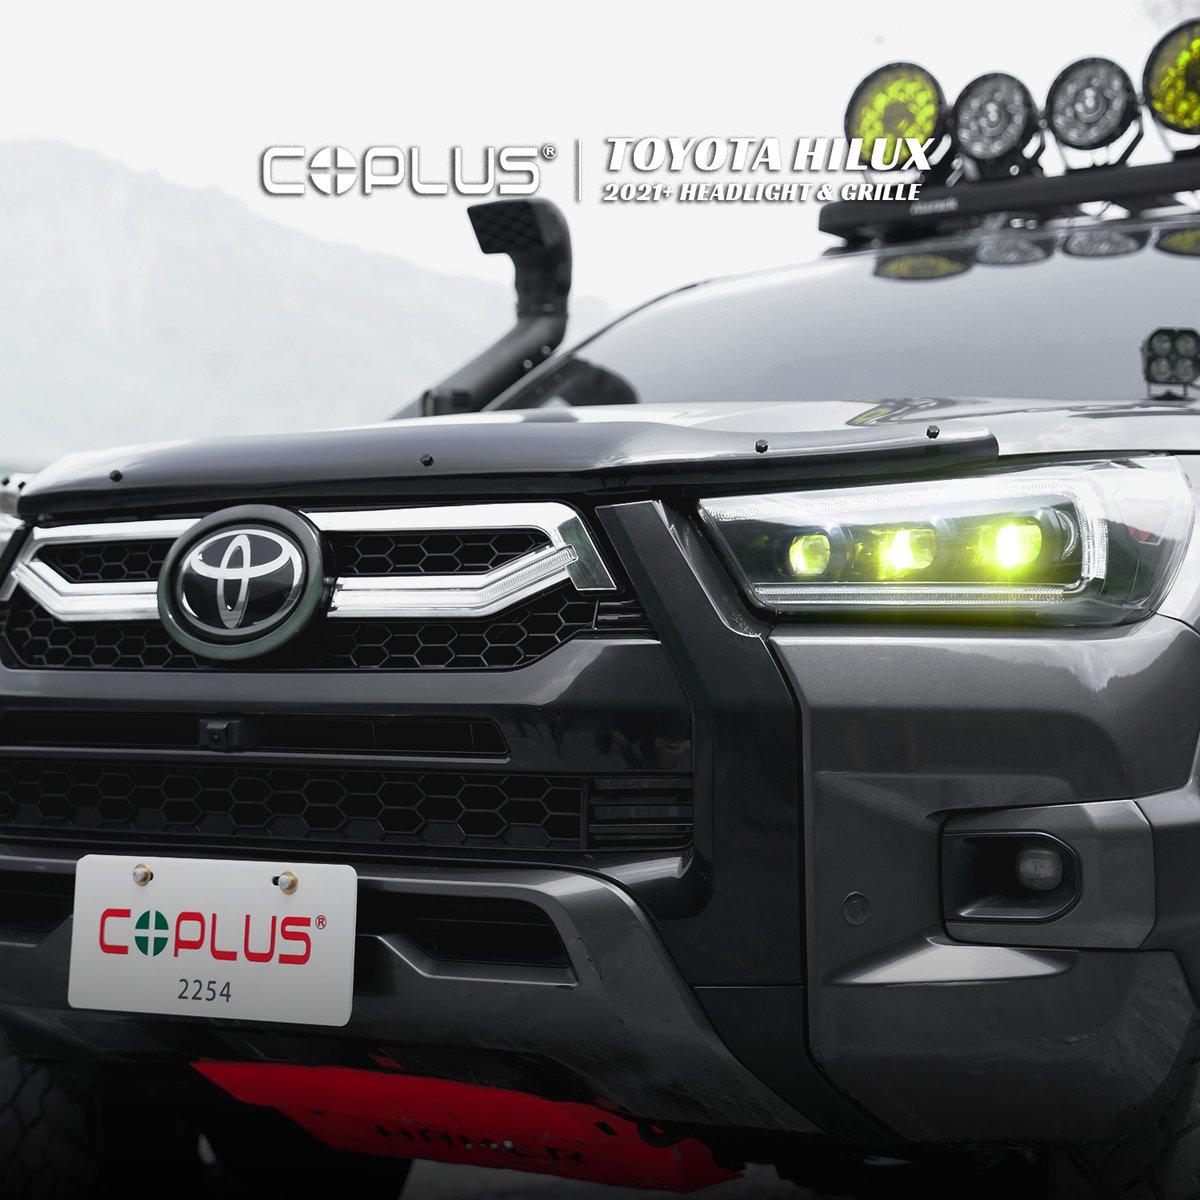 Behold the breathtaking fusion of technology and nature! Our Bi-beam Headlights cast a radiant golden glow, piercing through the daylight in the tranquil embrace of the valley. 

Get yours now! Reach out and order yours today!

#toyota #offroad #hilux  #COPLUS